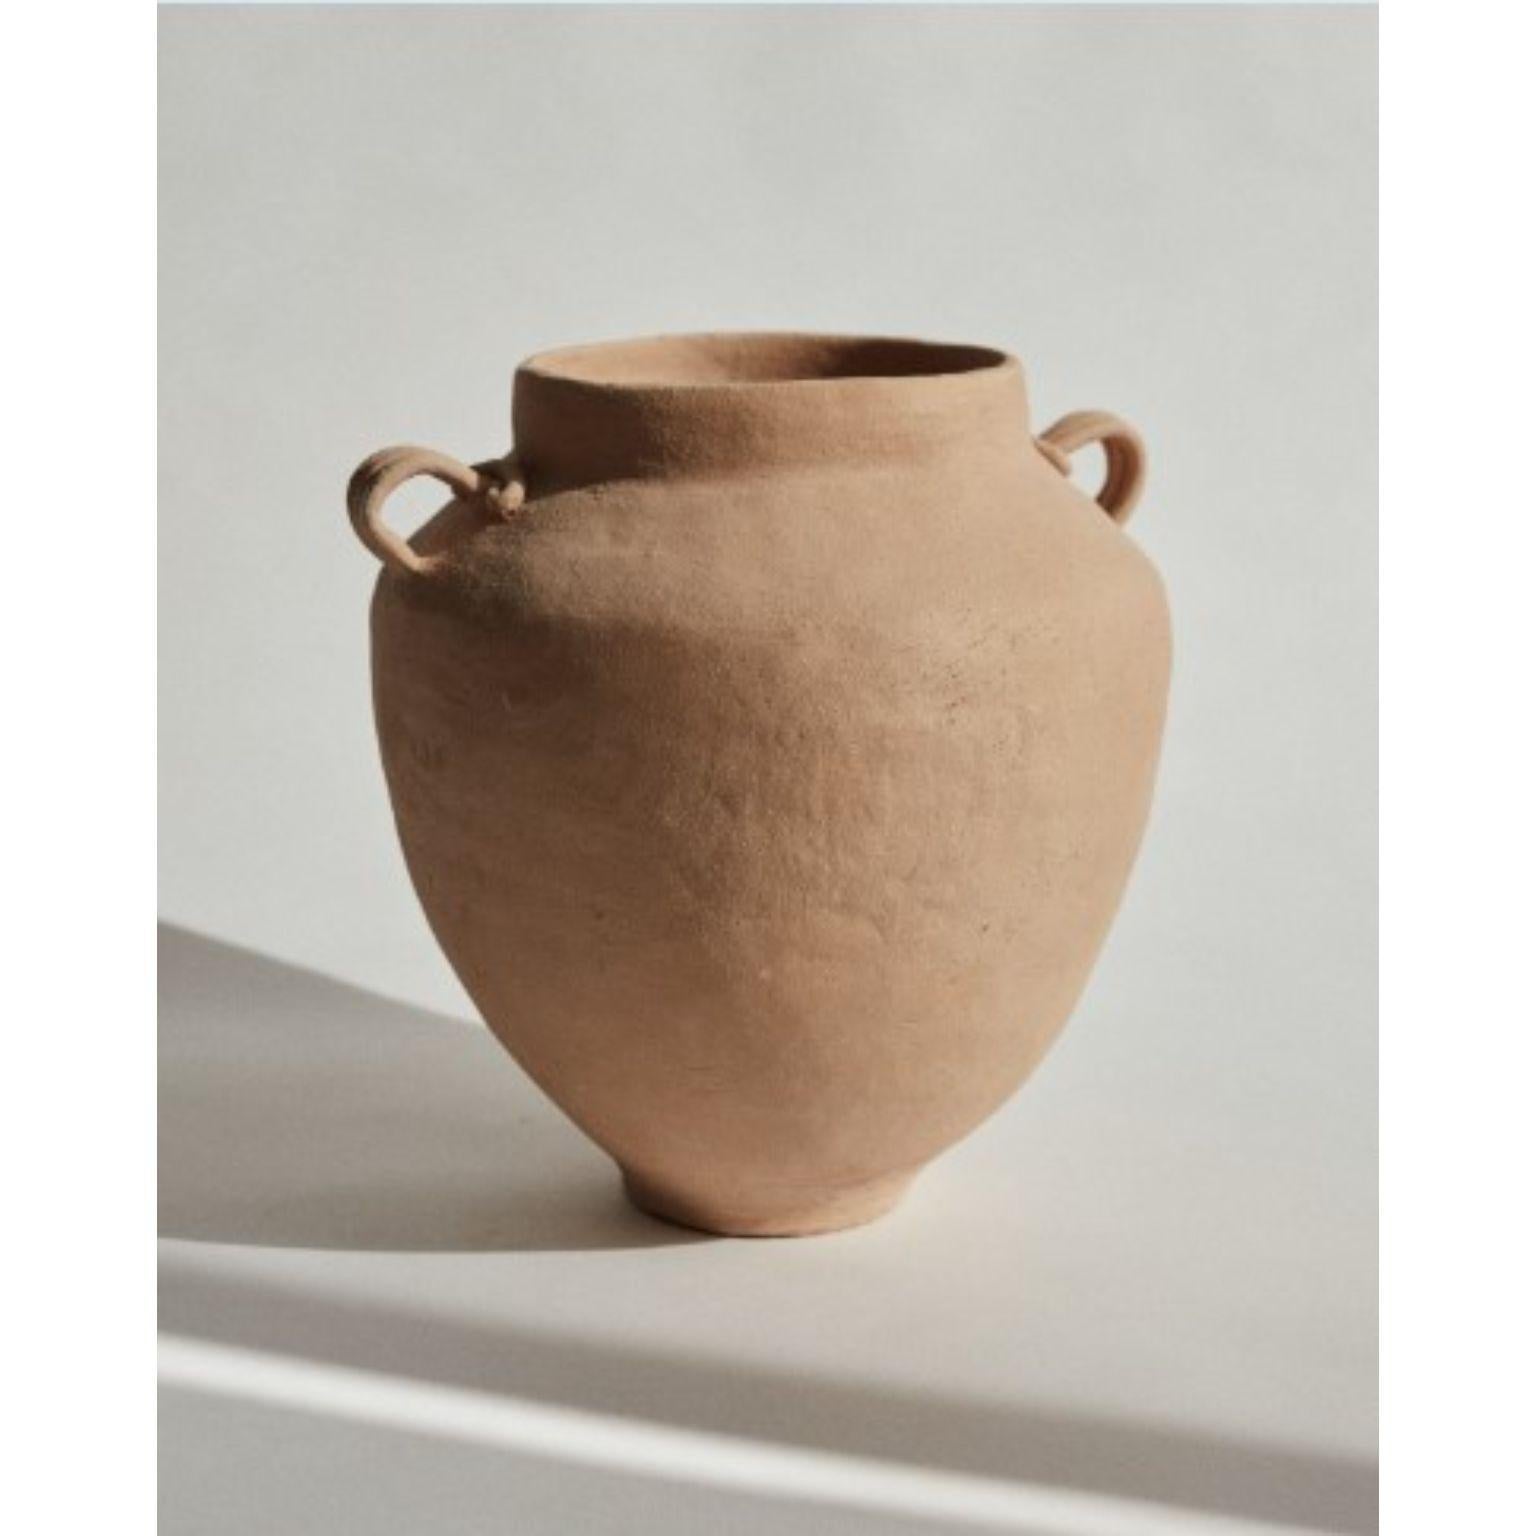 Column vase by Marta Bonilla
Dimensions: D27 x H37 cm
Materials: Terracotta, Clay

Column vase: Piece of high temperature hand modeled with pinkish brown clay with chamotte. Glazed inside. Handle details reminiscent of Greek columns.

Marta